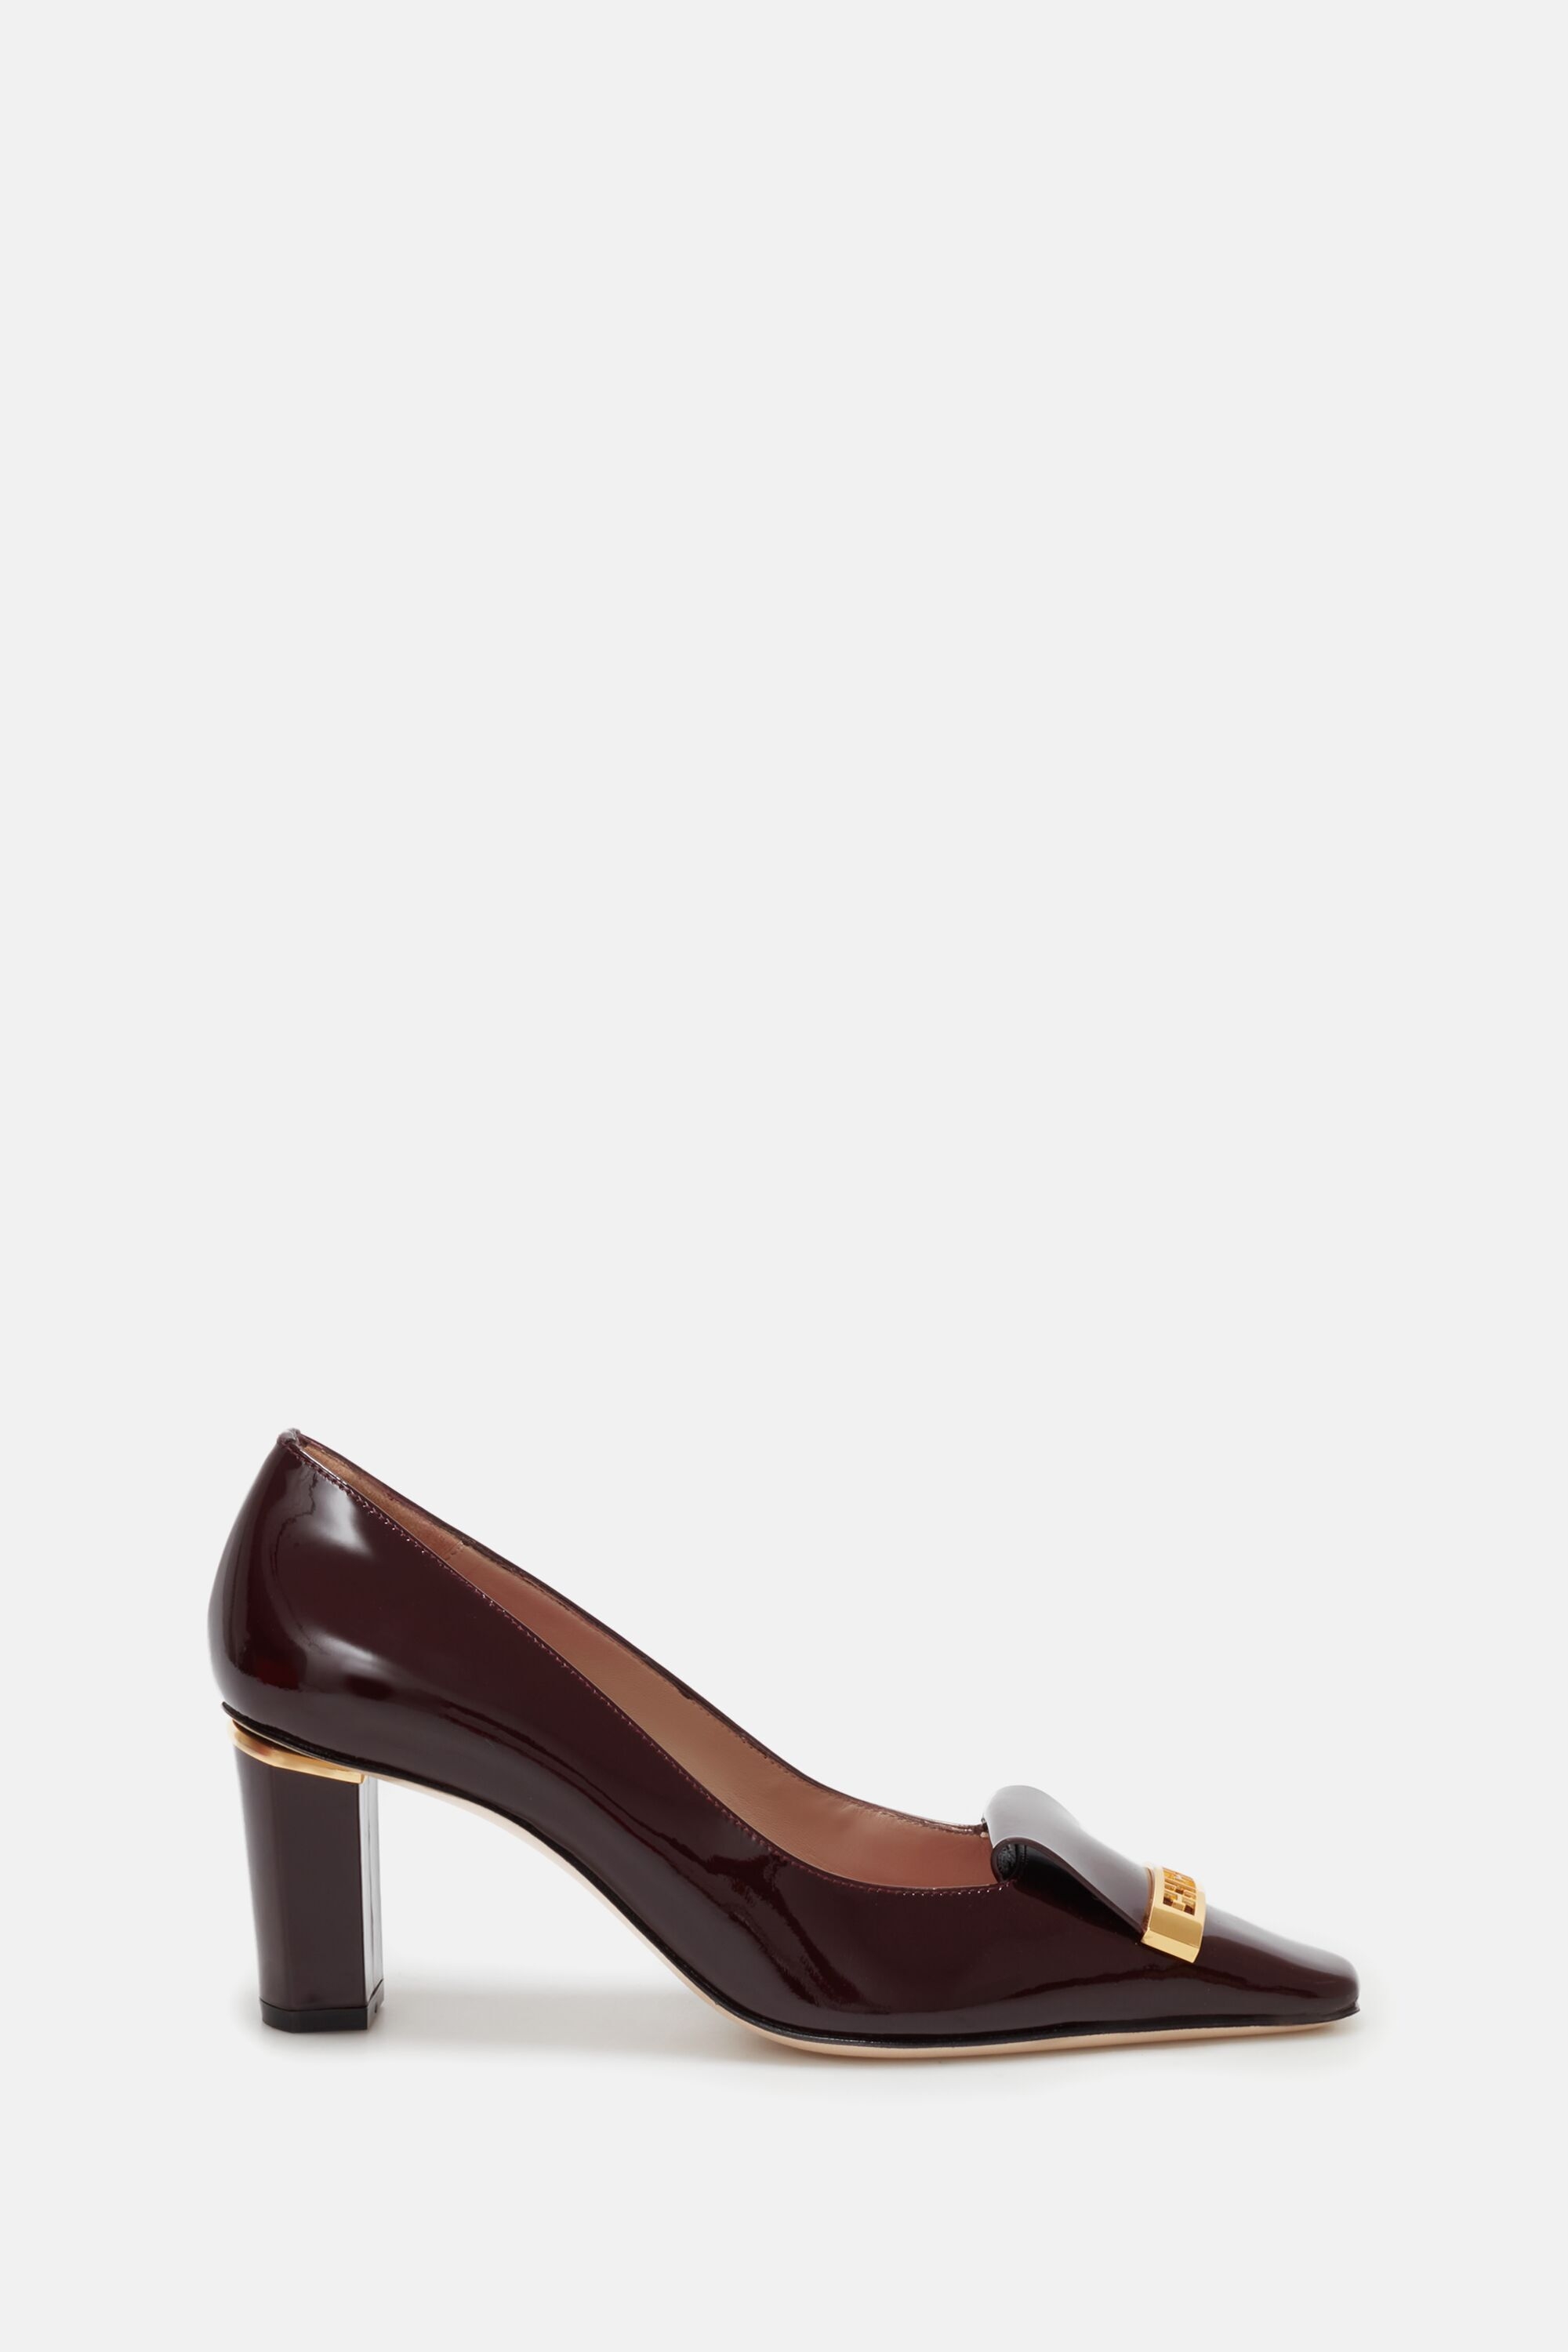 2020 Initials 65 leather pumps